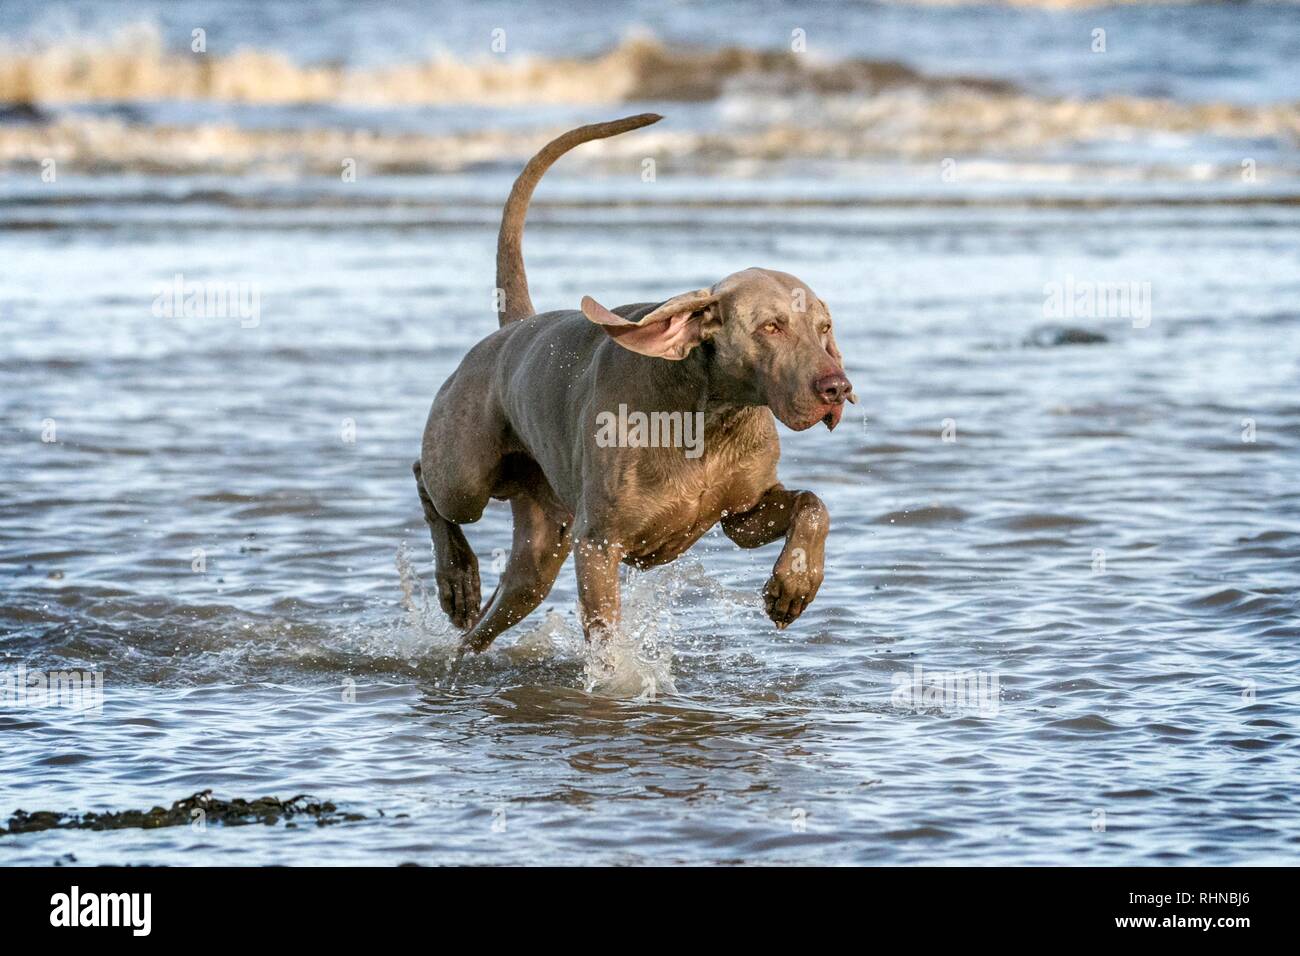 Southport, Merseyside, UK. 3rd February 2019. Weimaraner Playing.  Kobi, a beautiful five year old Weimaraner, plays with his favourite rope ball along the shores of Southport beach in Merseyside.  The Weimaraner is a large dog that was originally bred for hunting in the early 19th century. Early Weimaraners were used by royalty for hunting large game such as boar, bear and deer.  Credit: Cernan Elias/Alamy Live News Stock Photo